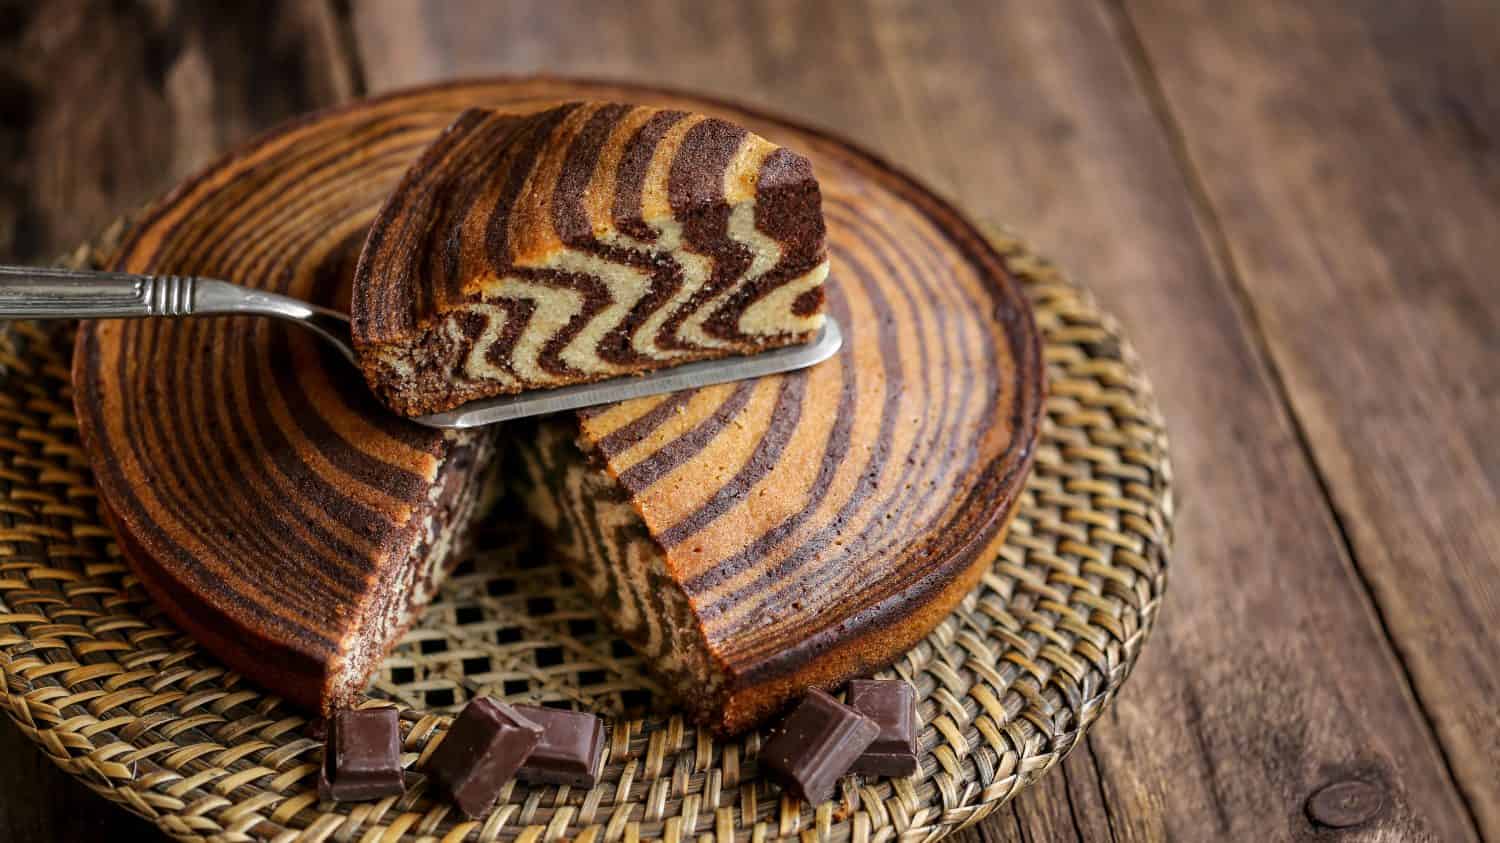 zebra cake with vanilla and chocolate on wooden table 